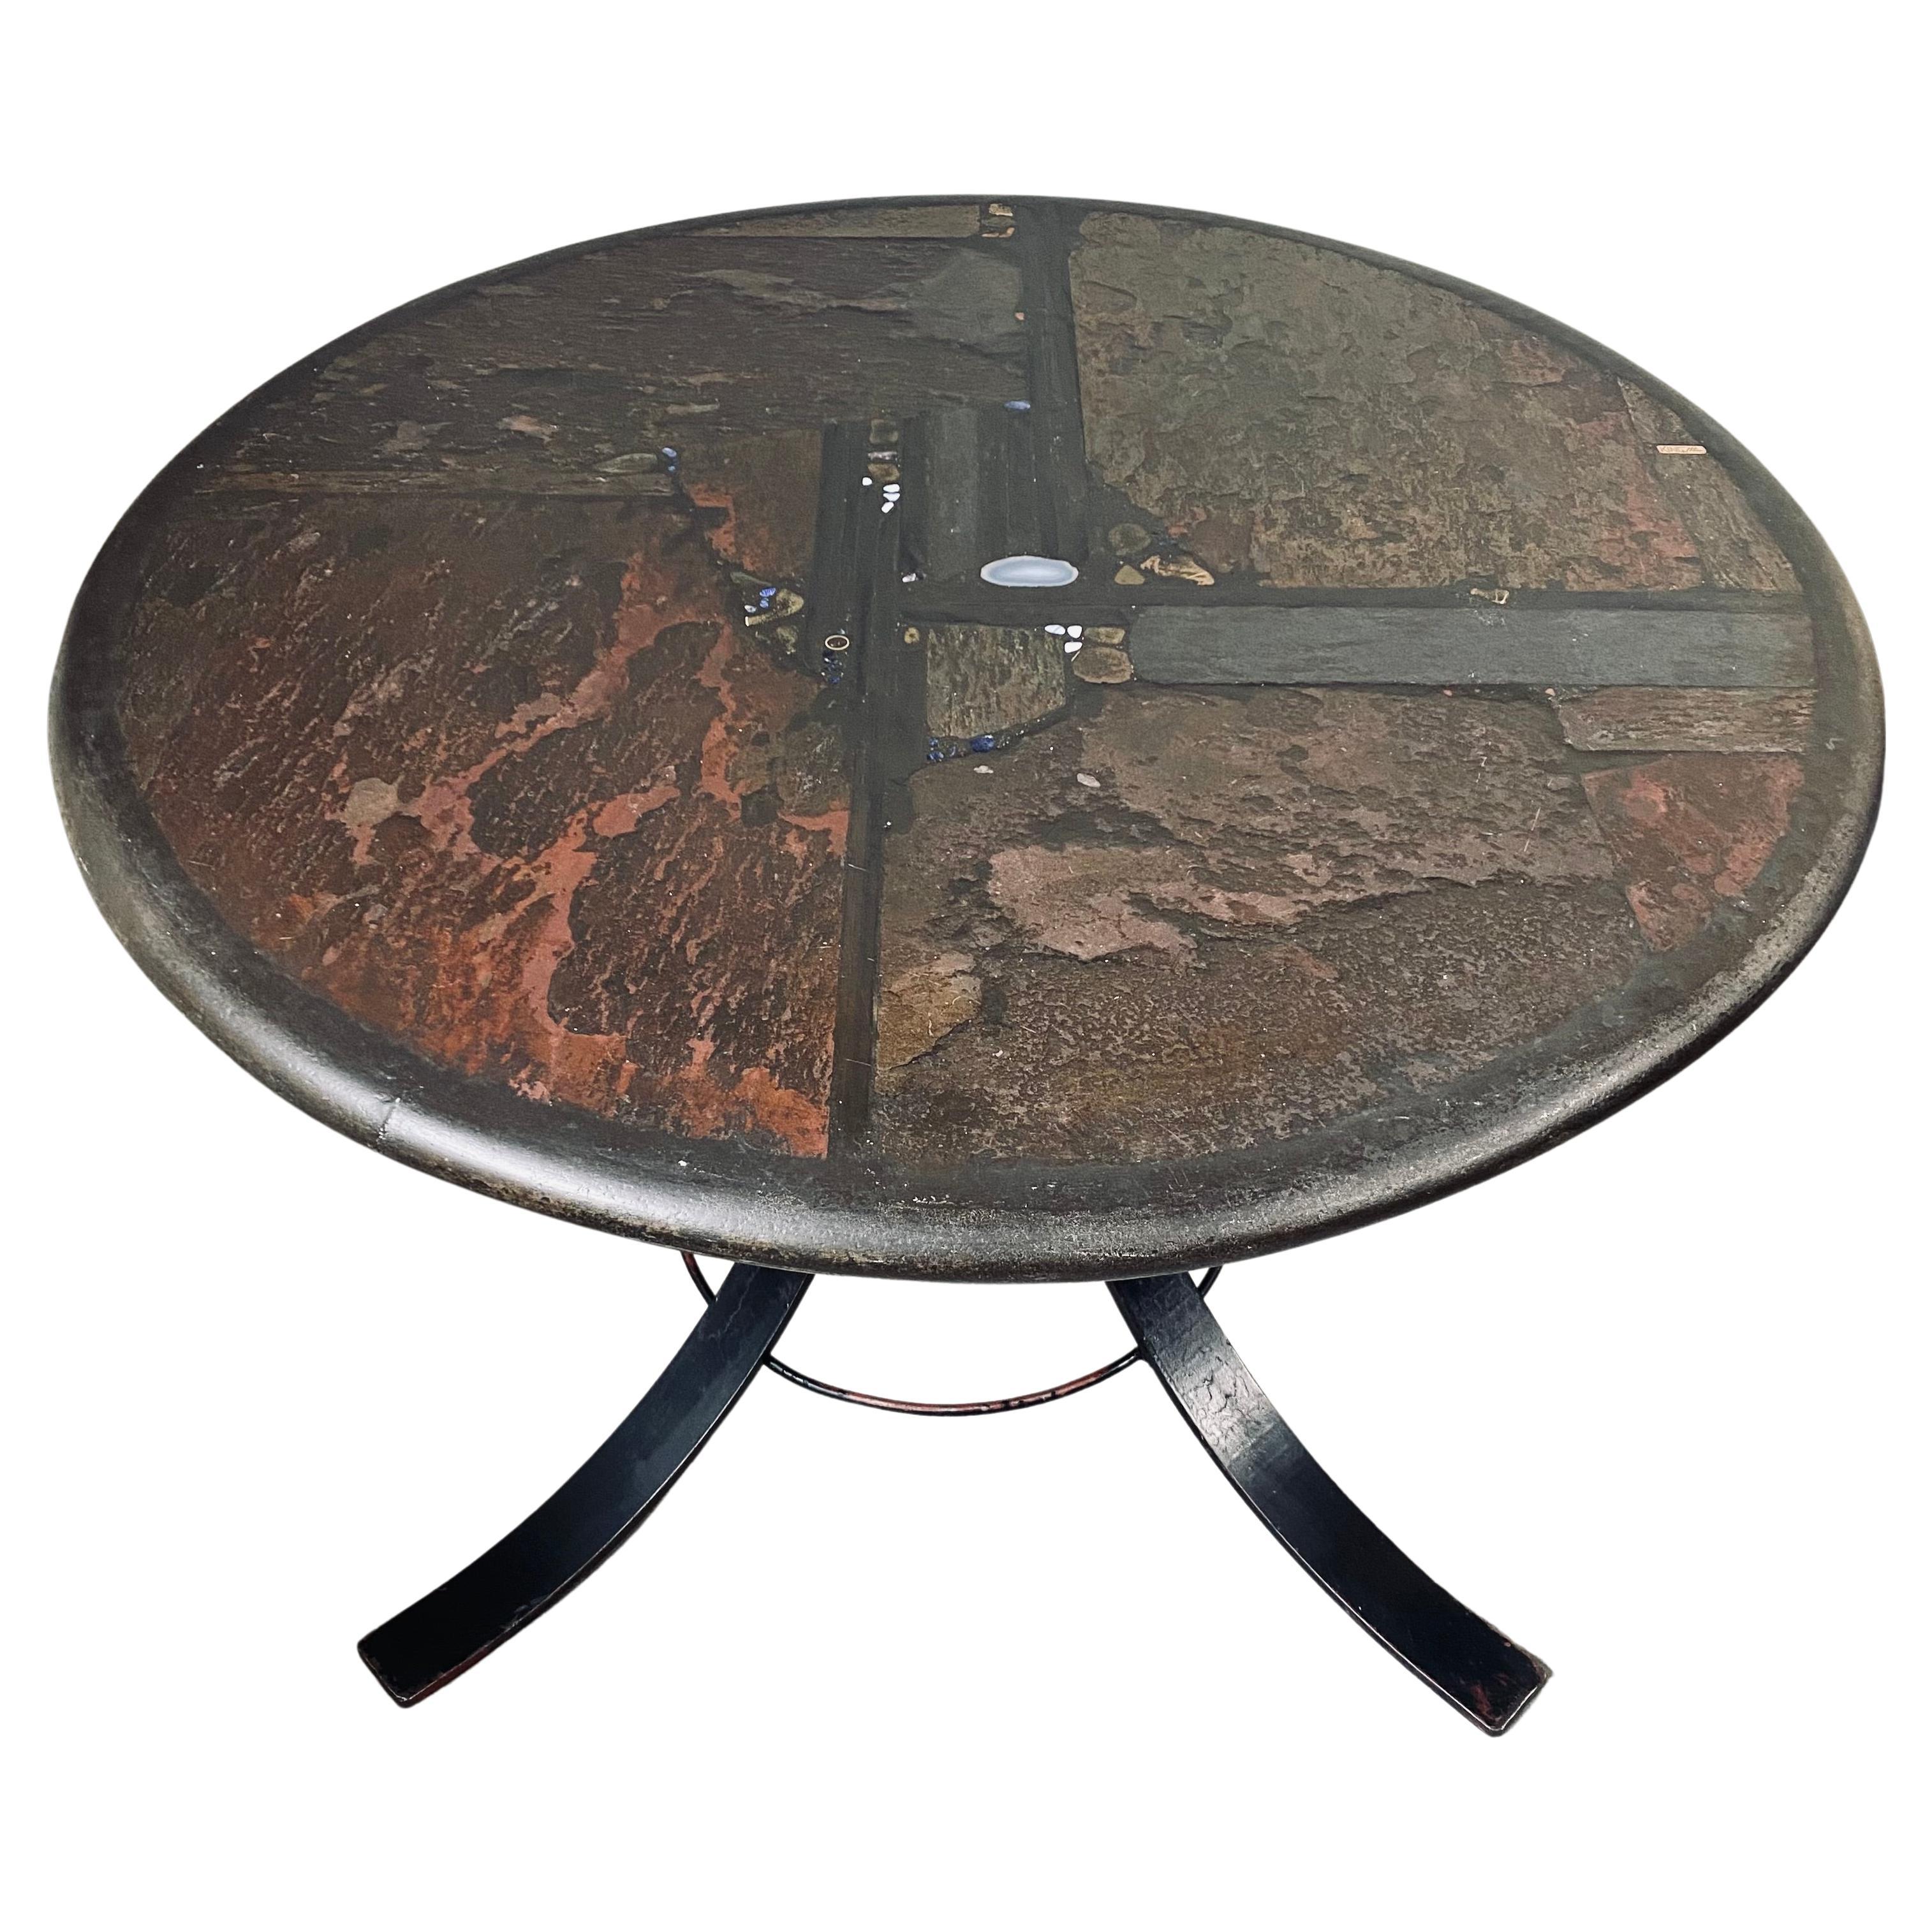 Brutalist Art Round Dining Table With Cast Iron Base By Paul Kingma Agate 1980 For Sale